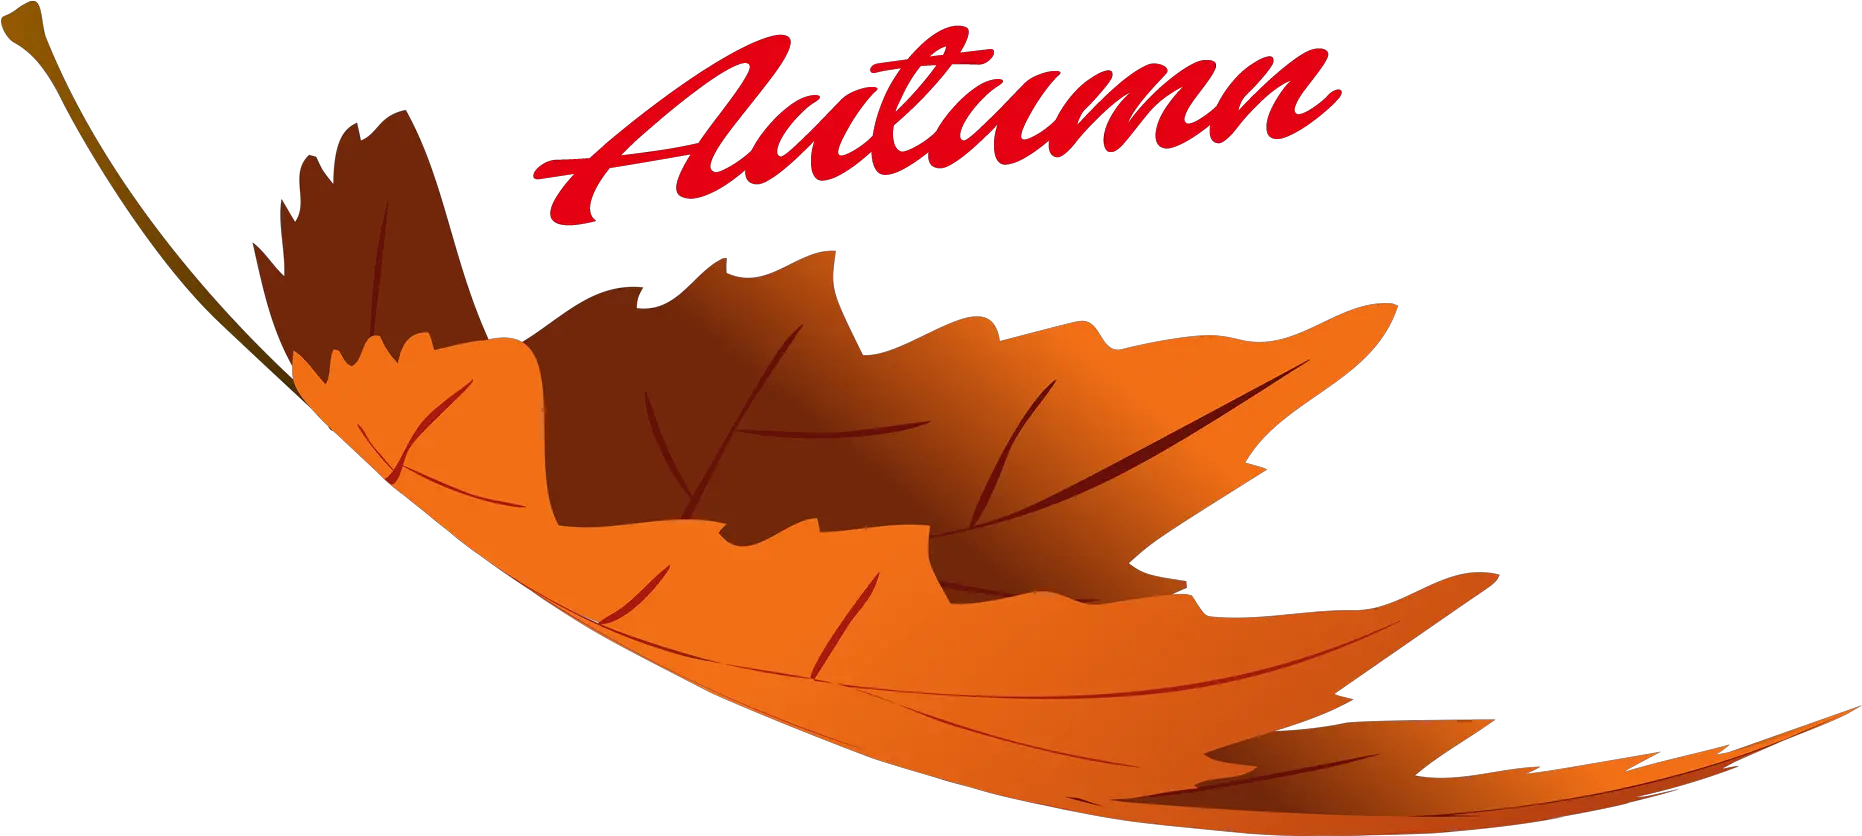 Download Hd Autumn Leaves Png Image Autumn Leaves Png Clipart Autumn Leaves Png